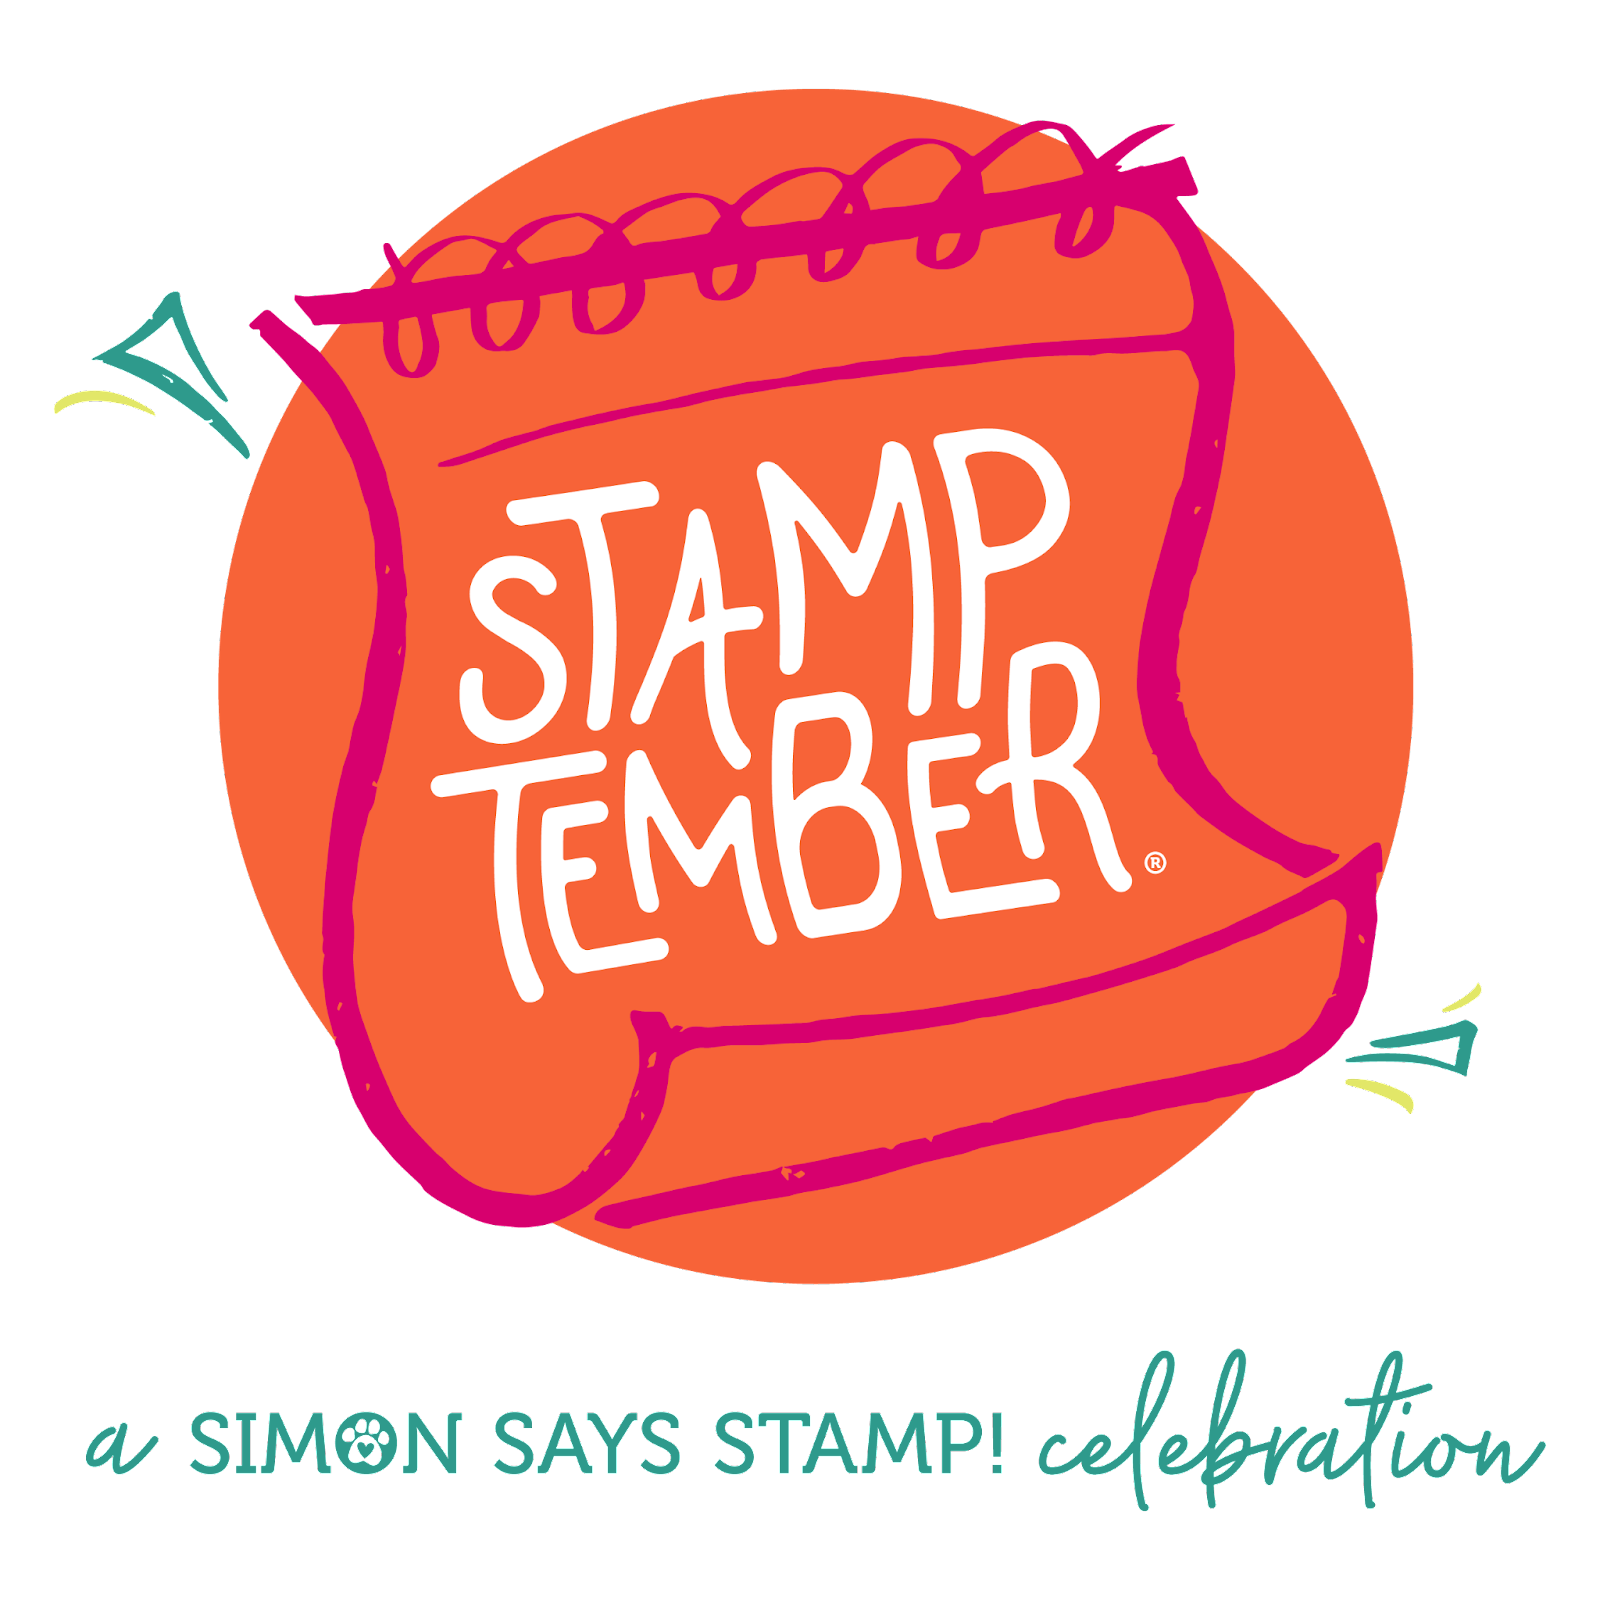 It’s A Stamptember Blog Party!